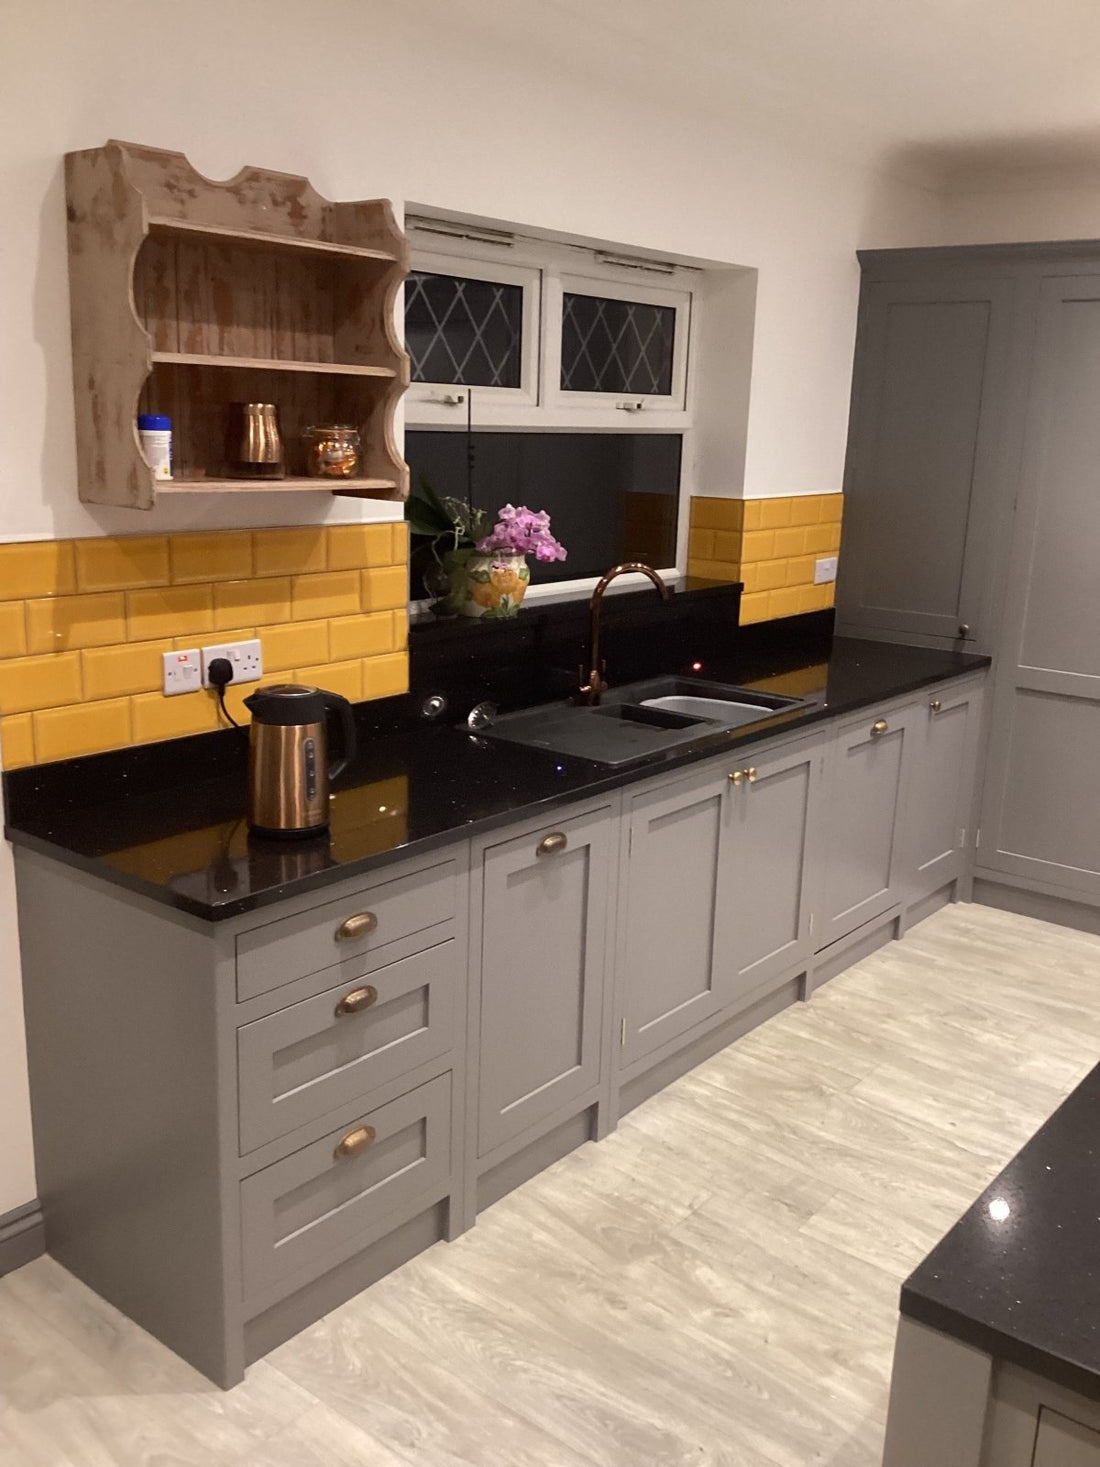 Top tips for maintaining the finish on your Painted Kitchen Cabinets. - The Painted Kitchen Company Ltd